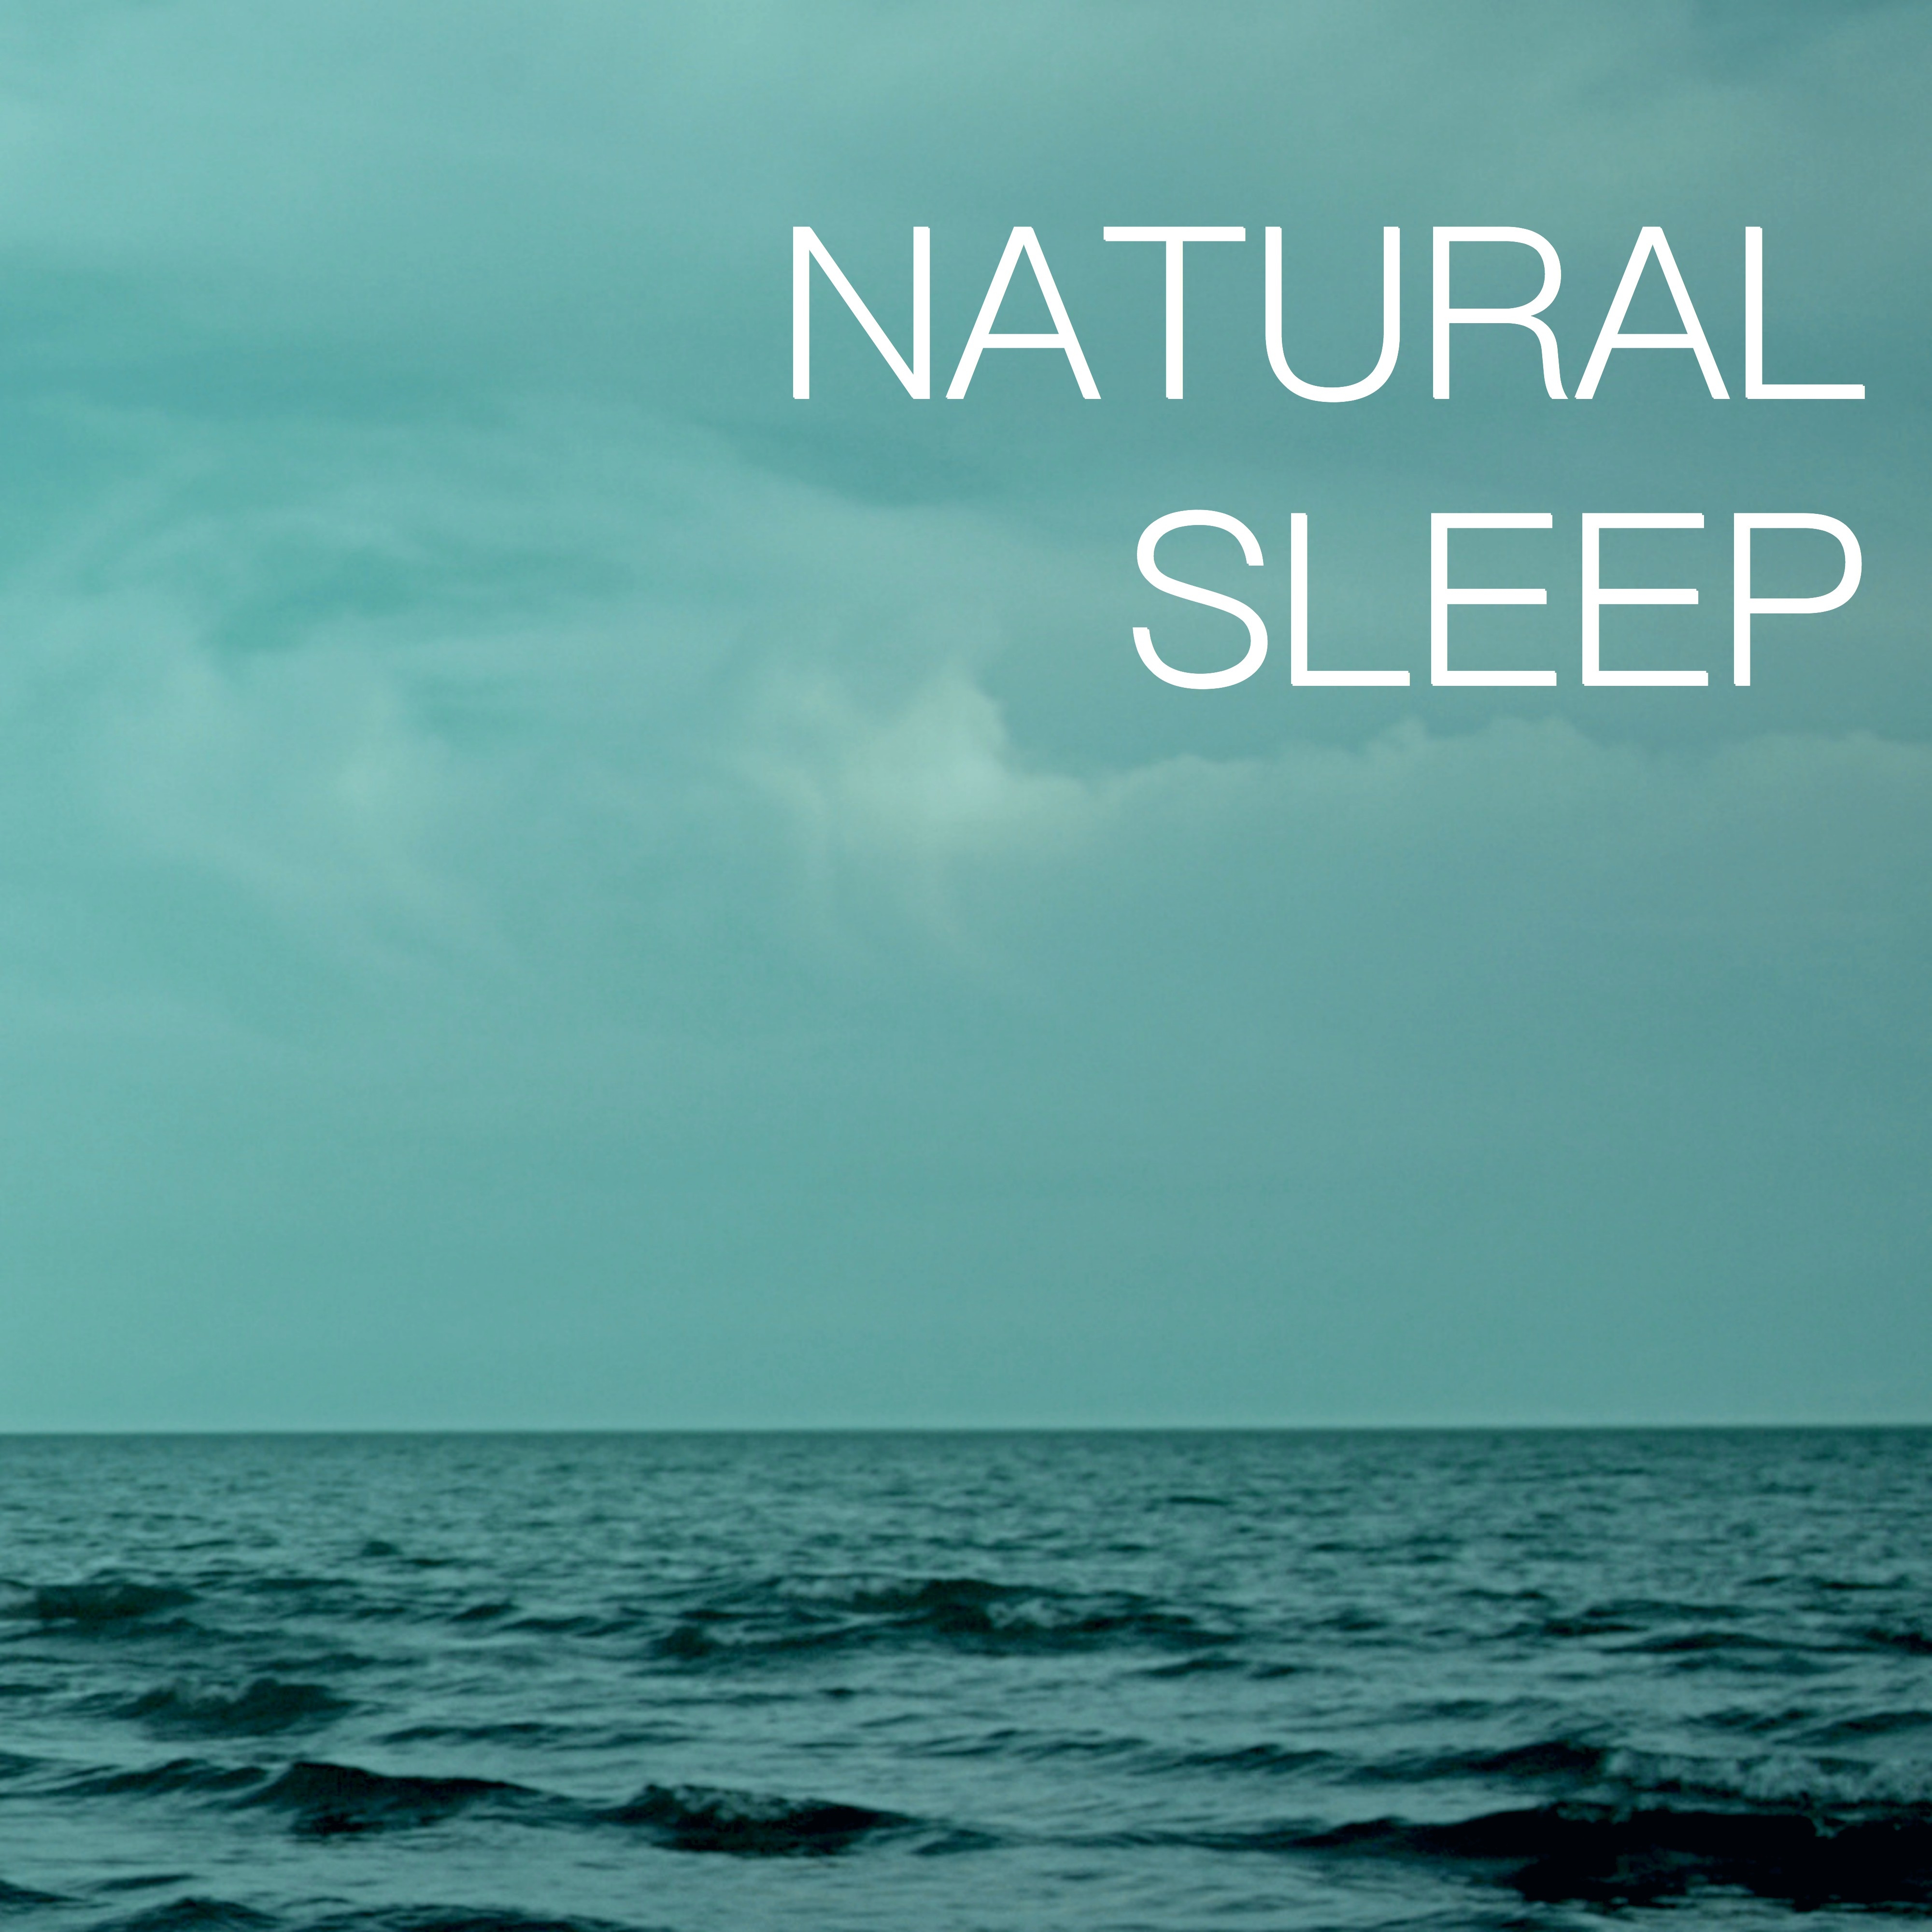 Natural Sleep - Warm and Relaxing Music for Sleep Insomnia, Soothing Music for Sleep with Relaxing Nature Sounds, Relaxing Music Sleep and Background Music, True Nature Sound to Help You Sleep